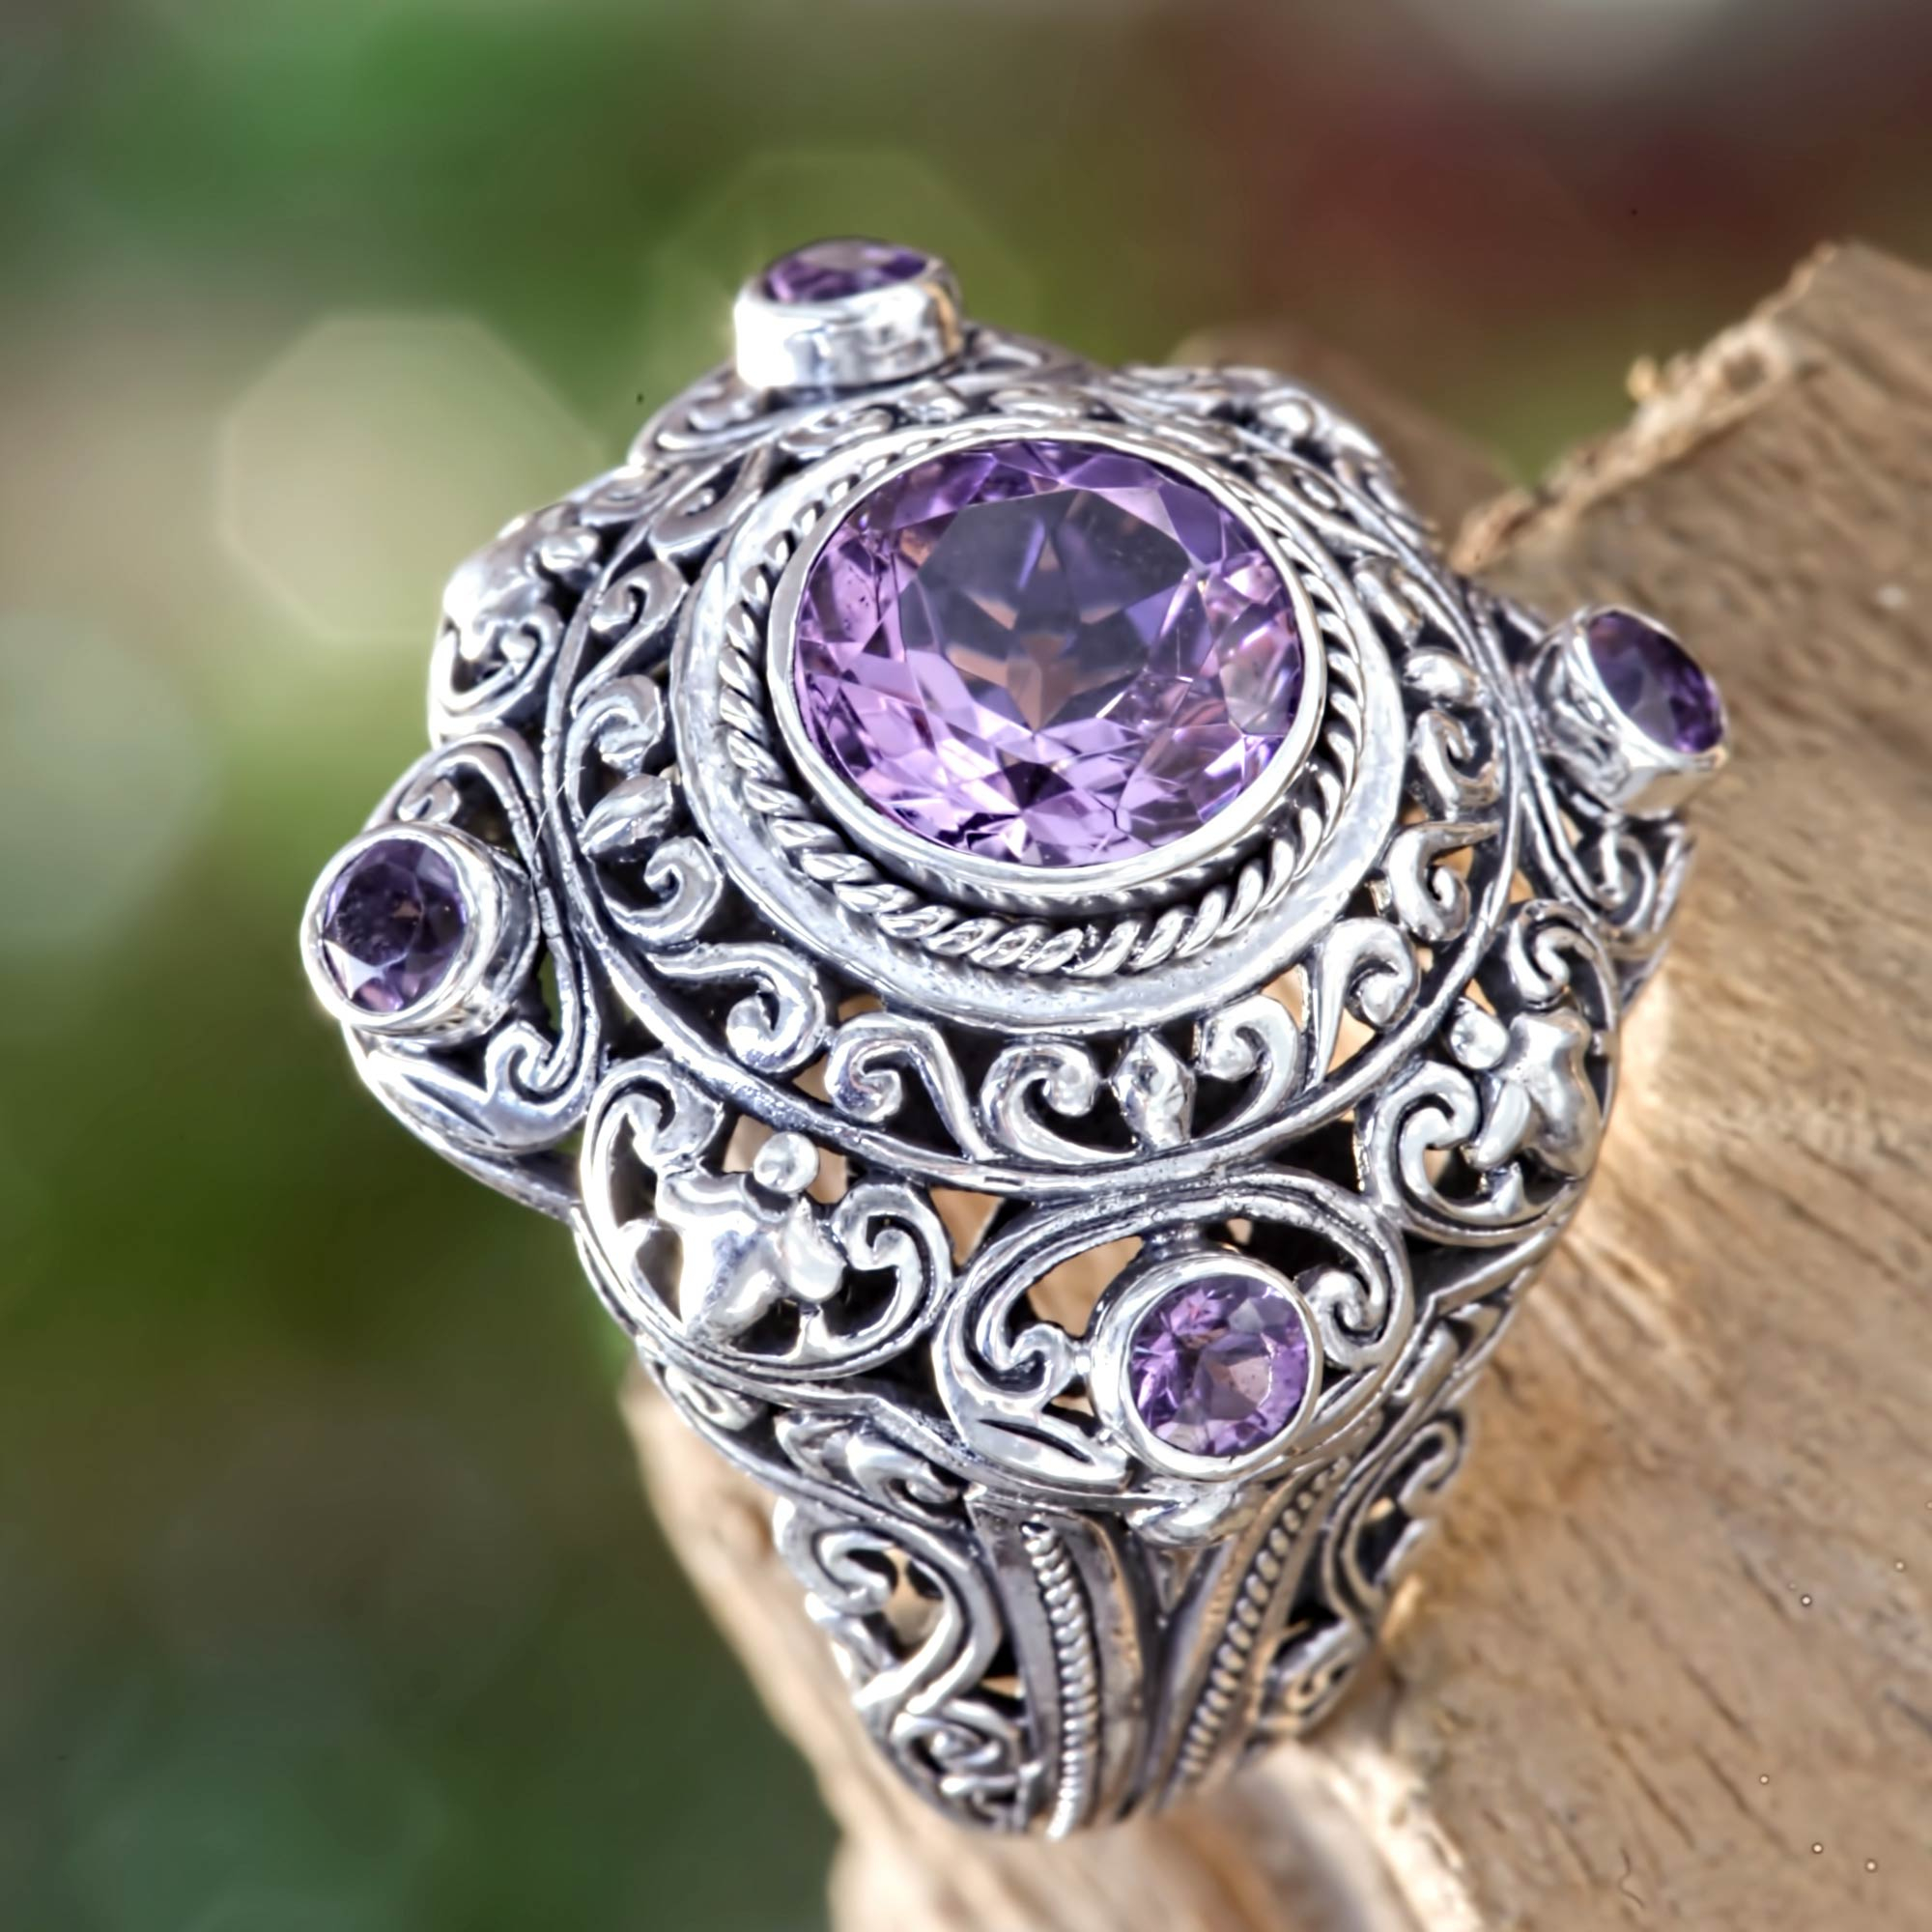 Amethyst and Silver Cocktail Ring from Bali - Mahameru Purple